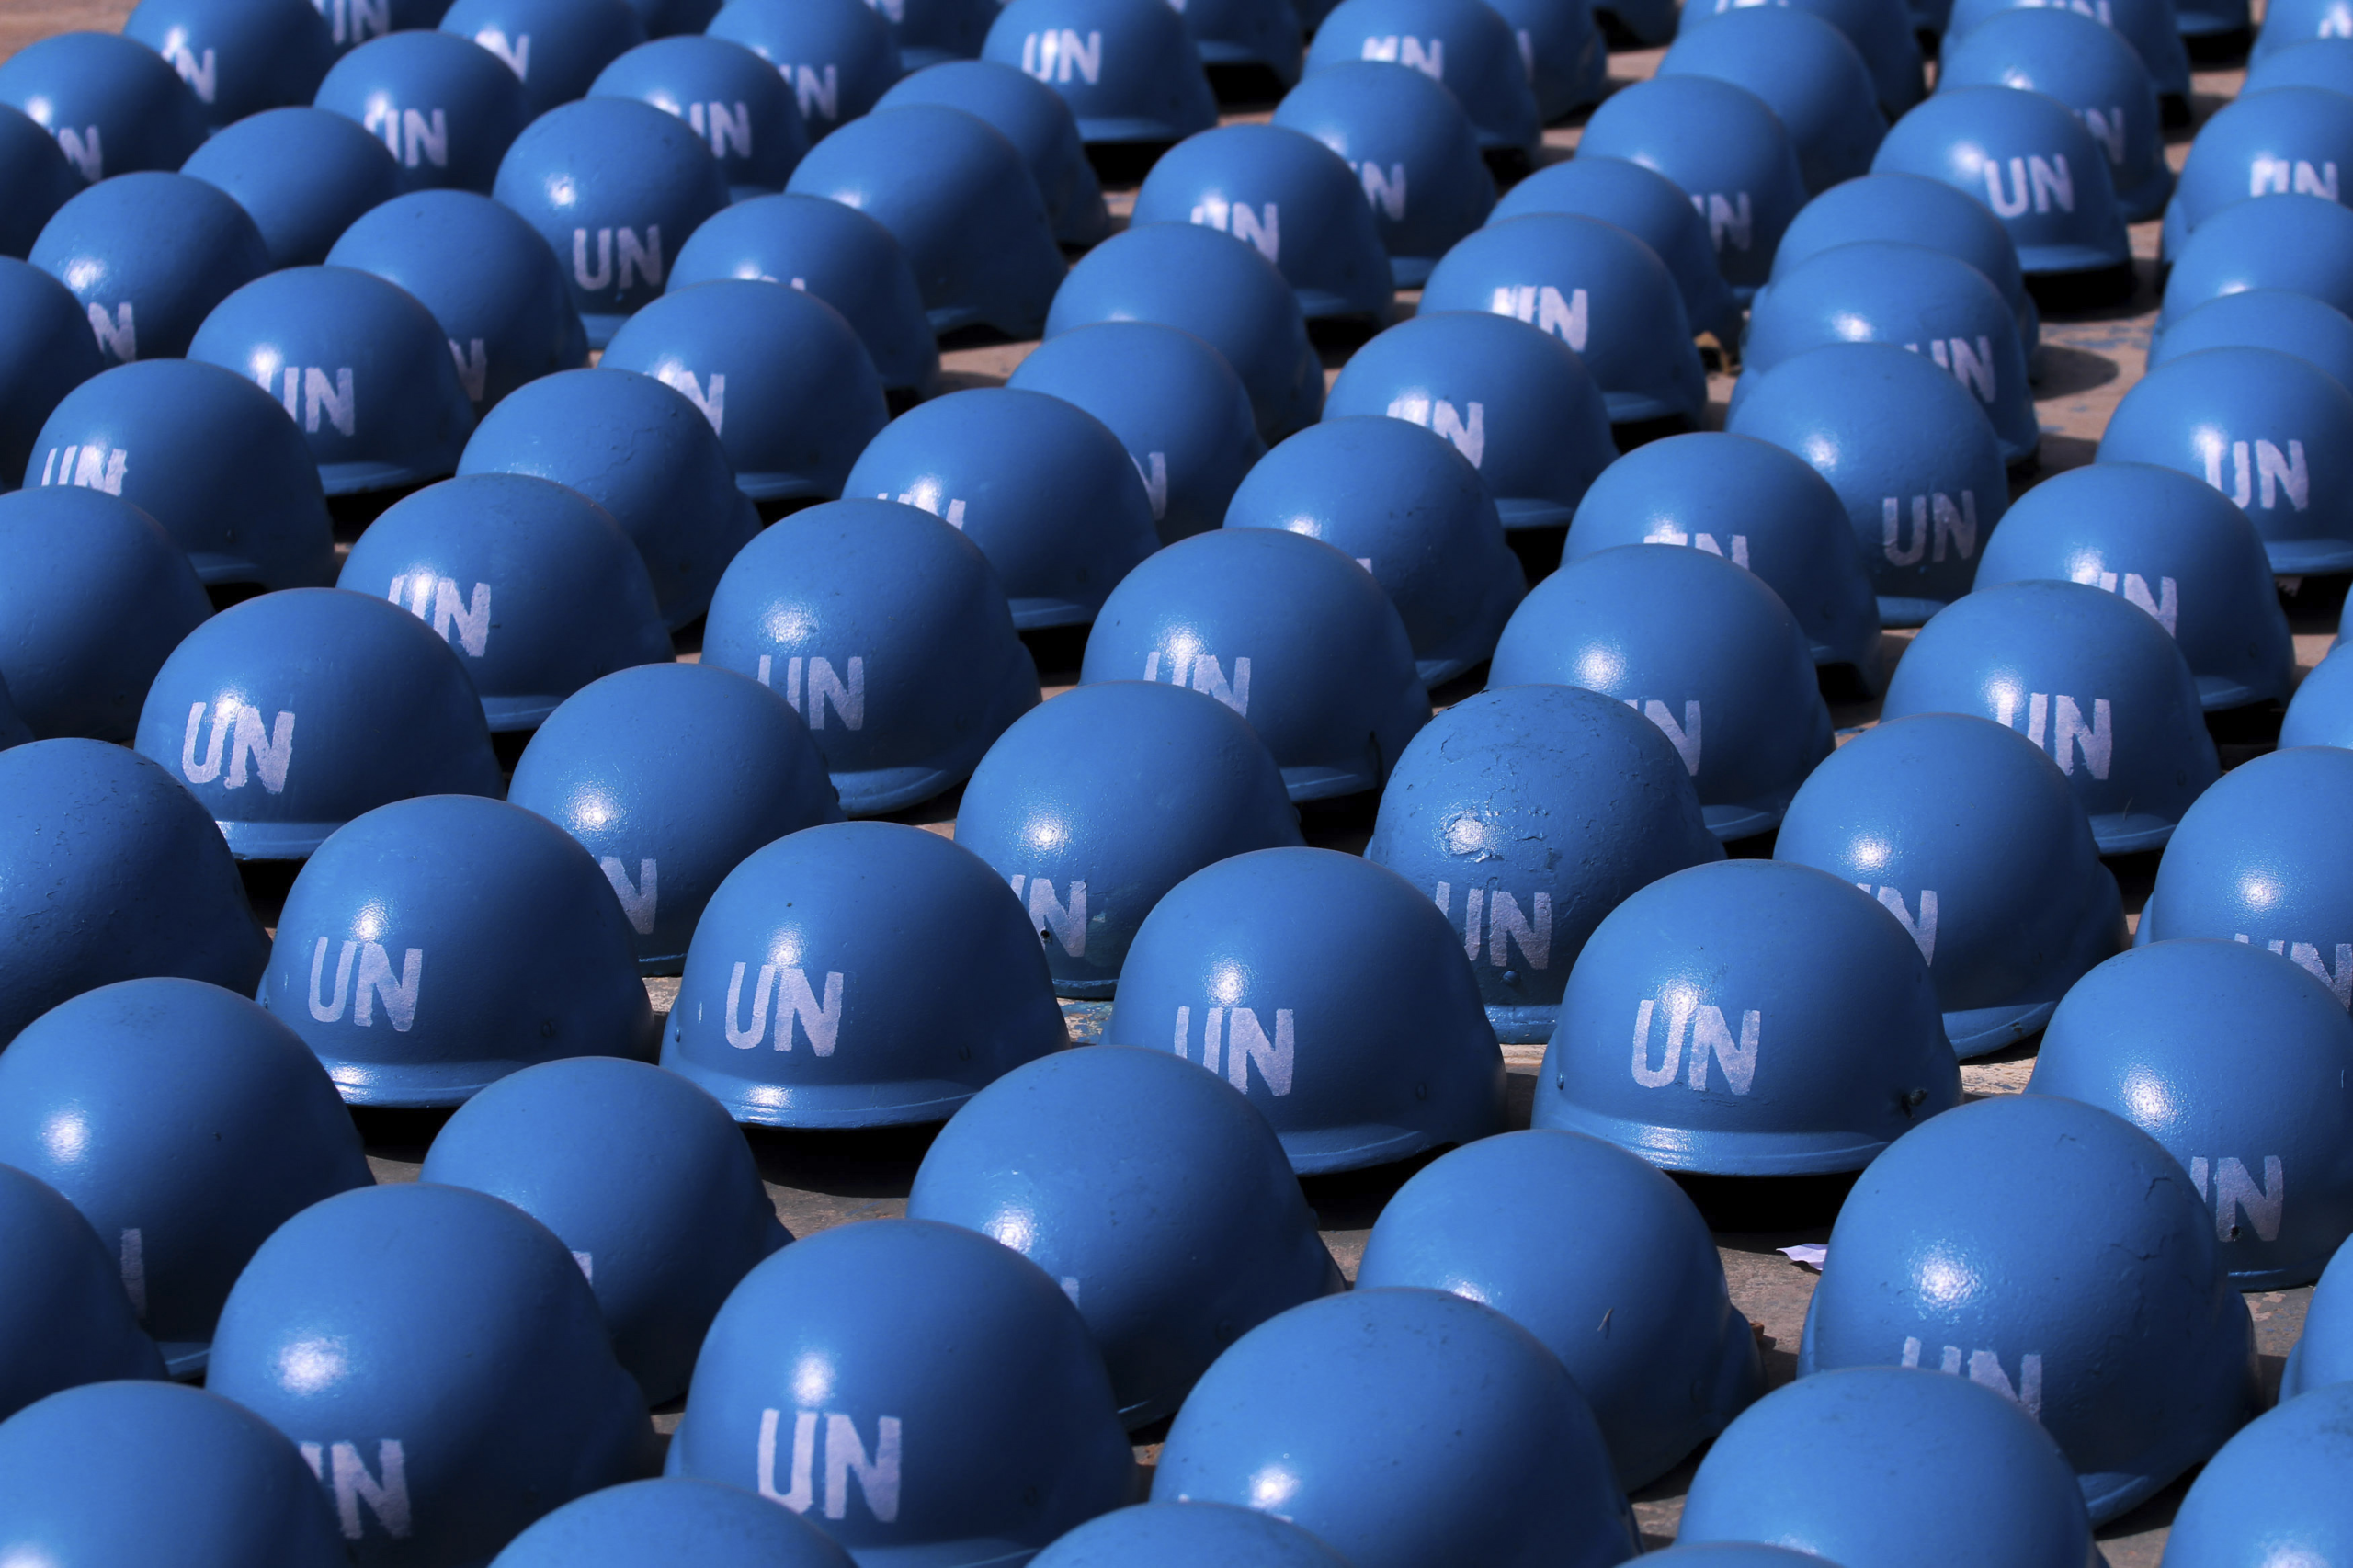 What Future for UN Peacekeeping in Africa after Mali Shutters Its Mission?